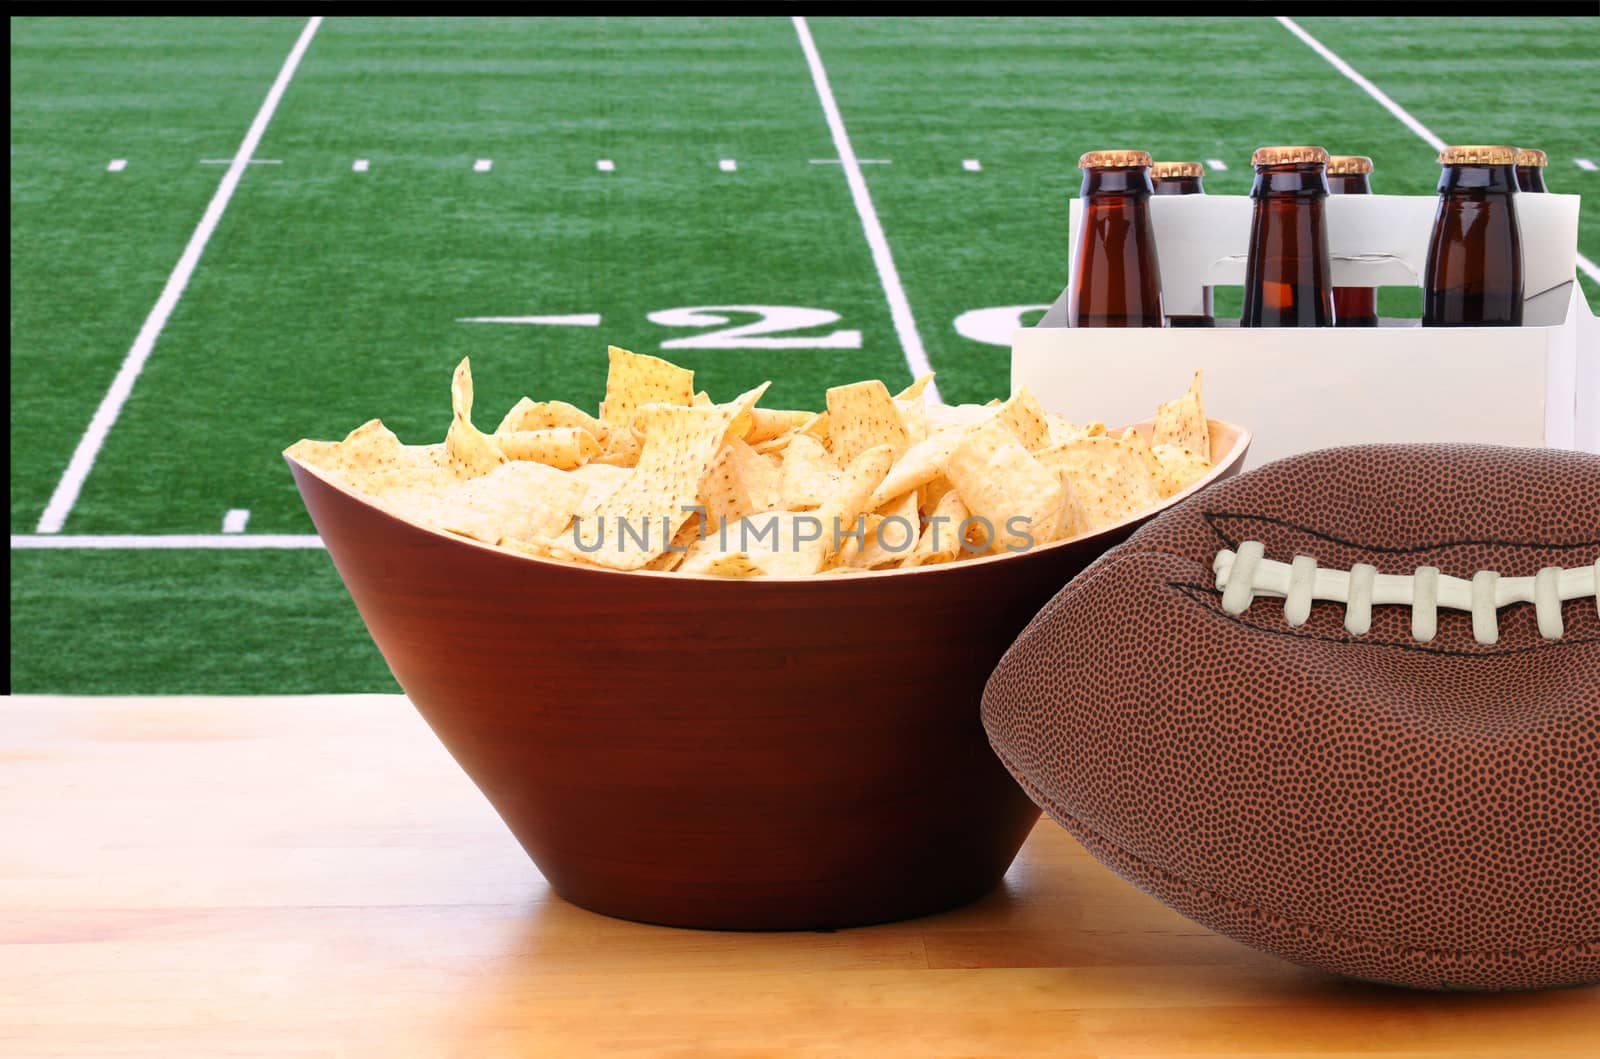 A deflated football and Six Pack of Beer and bowl of chips on a table in front of a big screen TV with a Football field. Great for Super Bowl themed projects. Horizontal format.